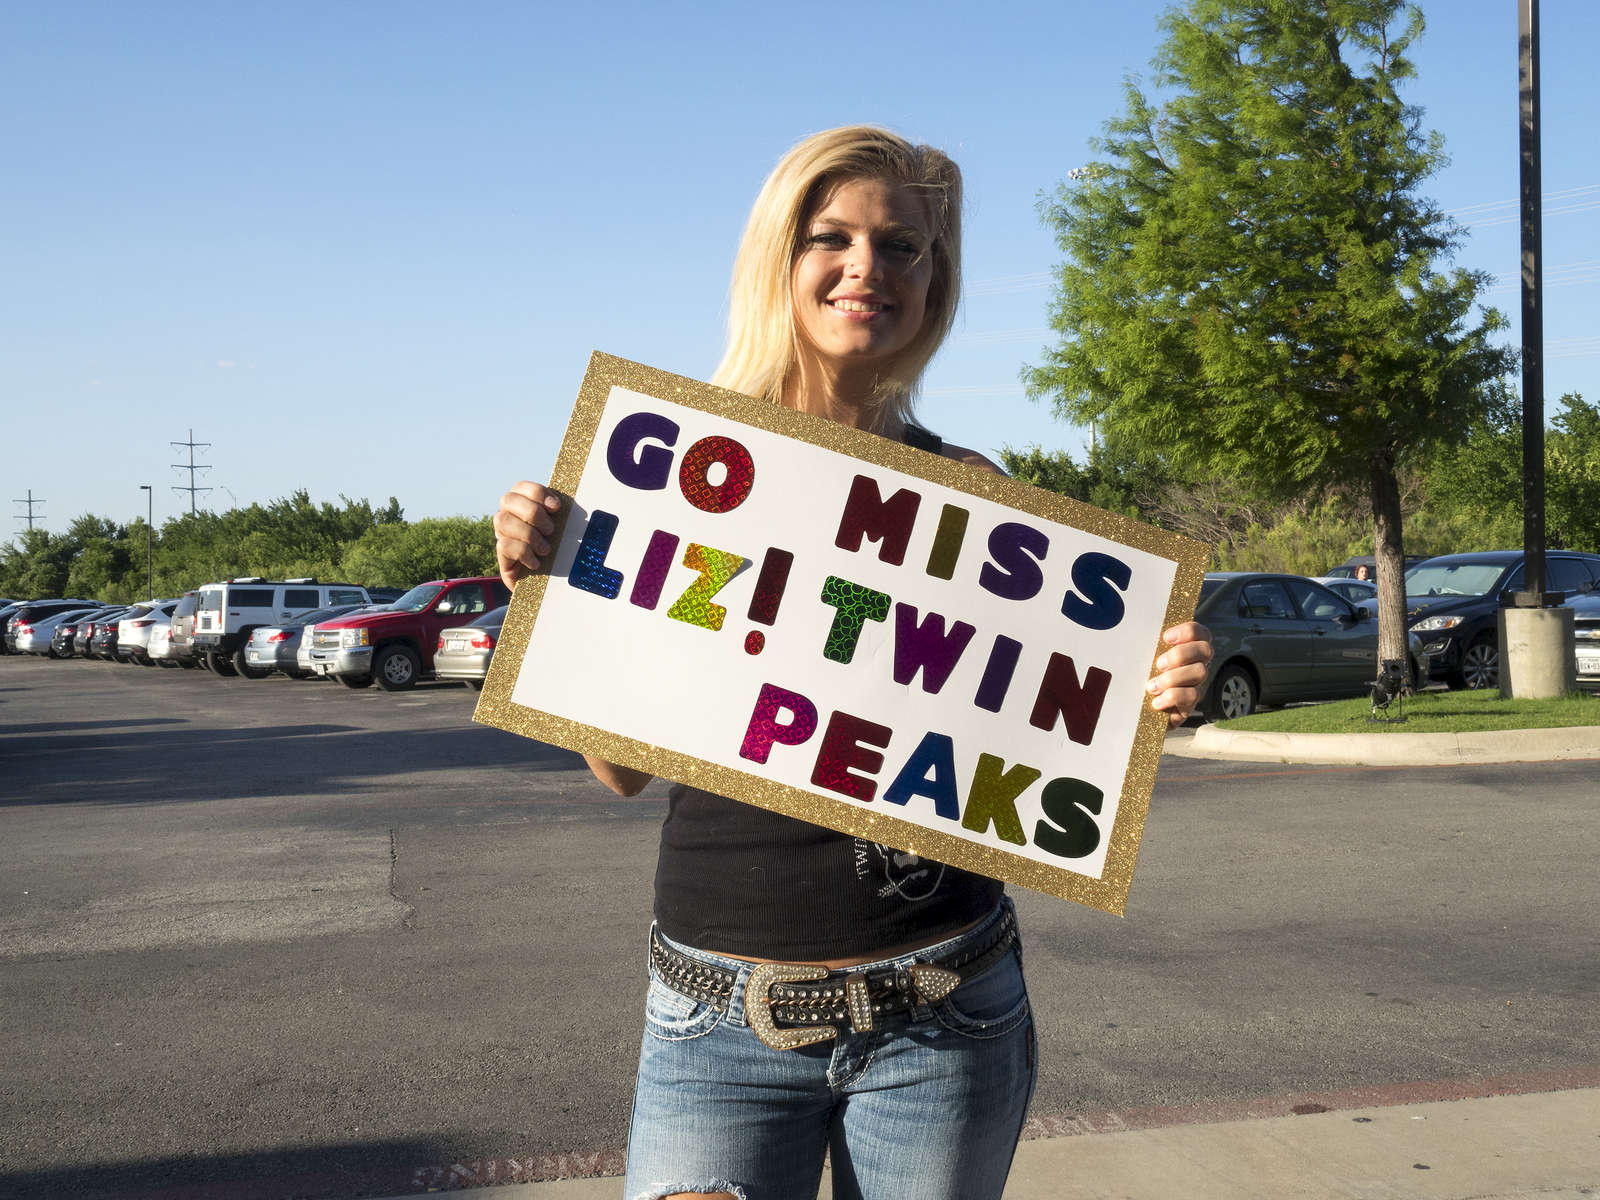 A visitor with a cheer card for Liz at the Twin Peaks 2015 National Bikini Contest where around 68 girls from the USA competed for the crown for Miss Twin Peaks 2015 at Gas Monkey Live Dallas on the 24th June.Twin Peaks is a chain of sports bars and restaurants (colloquially referred to as breastaurants) based in Dallas, Texas. The chain is known for having its waitresses dress in revealing uniforms that consist of cleavage- and midriff-revealing red plaid (or sometimes black bikini) tops, as well as khaki short shorts. At other times, waitresses wear revealing seasonal or themed outfits. Restaurants are decorated in the theme of a wilderness lodge and serve a mix of American, Southwest and Southern cuisines as well as alcohol. The chain's slogan is {quote}Eats. Drinks. Scenic Views.{quote}Dallas is a major city in Texas and is the largest urban center of the fourth most populous metropolitan area in the United States. The city ranks ninth in the U.S. and third in Texas after Houston and San Antonio. The city's prominence arose from its historical importance as a center for the oil and cotton industries, and its position along numerous railroad lines.For two weeks in the summer of 2015, photographer Peter Dench visited Dallas to document the metroplex in his epic reportage, DENCH DOES DALLAS.Photographed using an Olympus E-M5 Mark II©Peter Dench/Getty Images Reportage